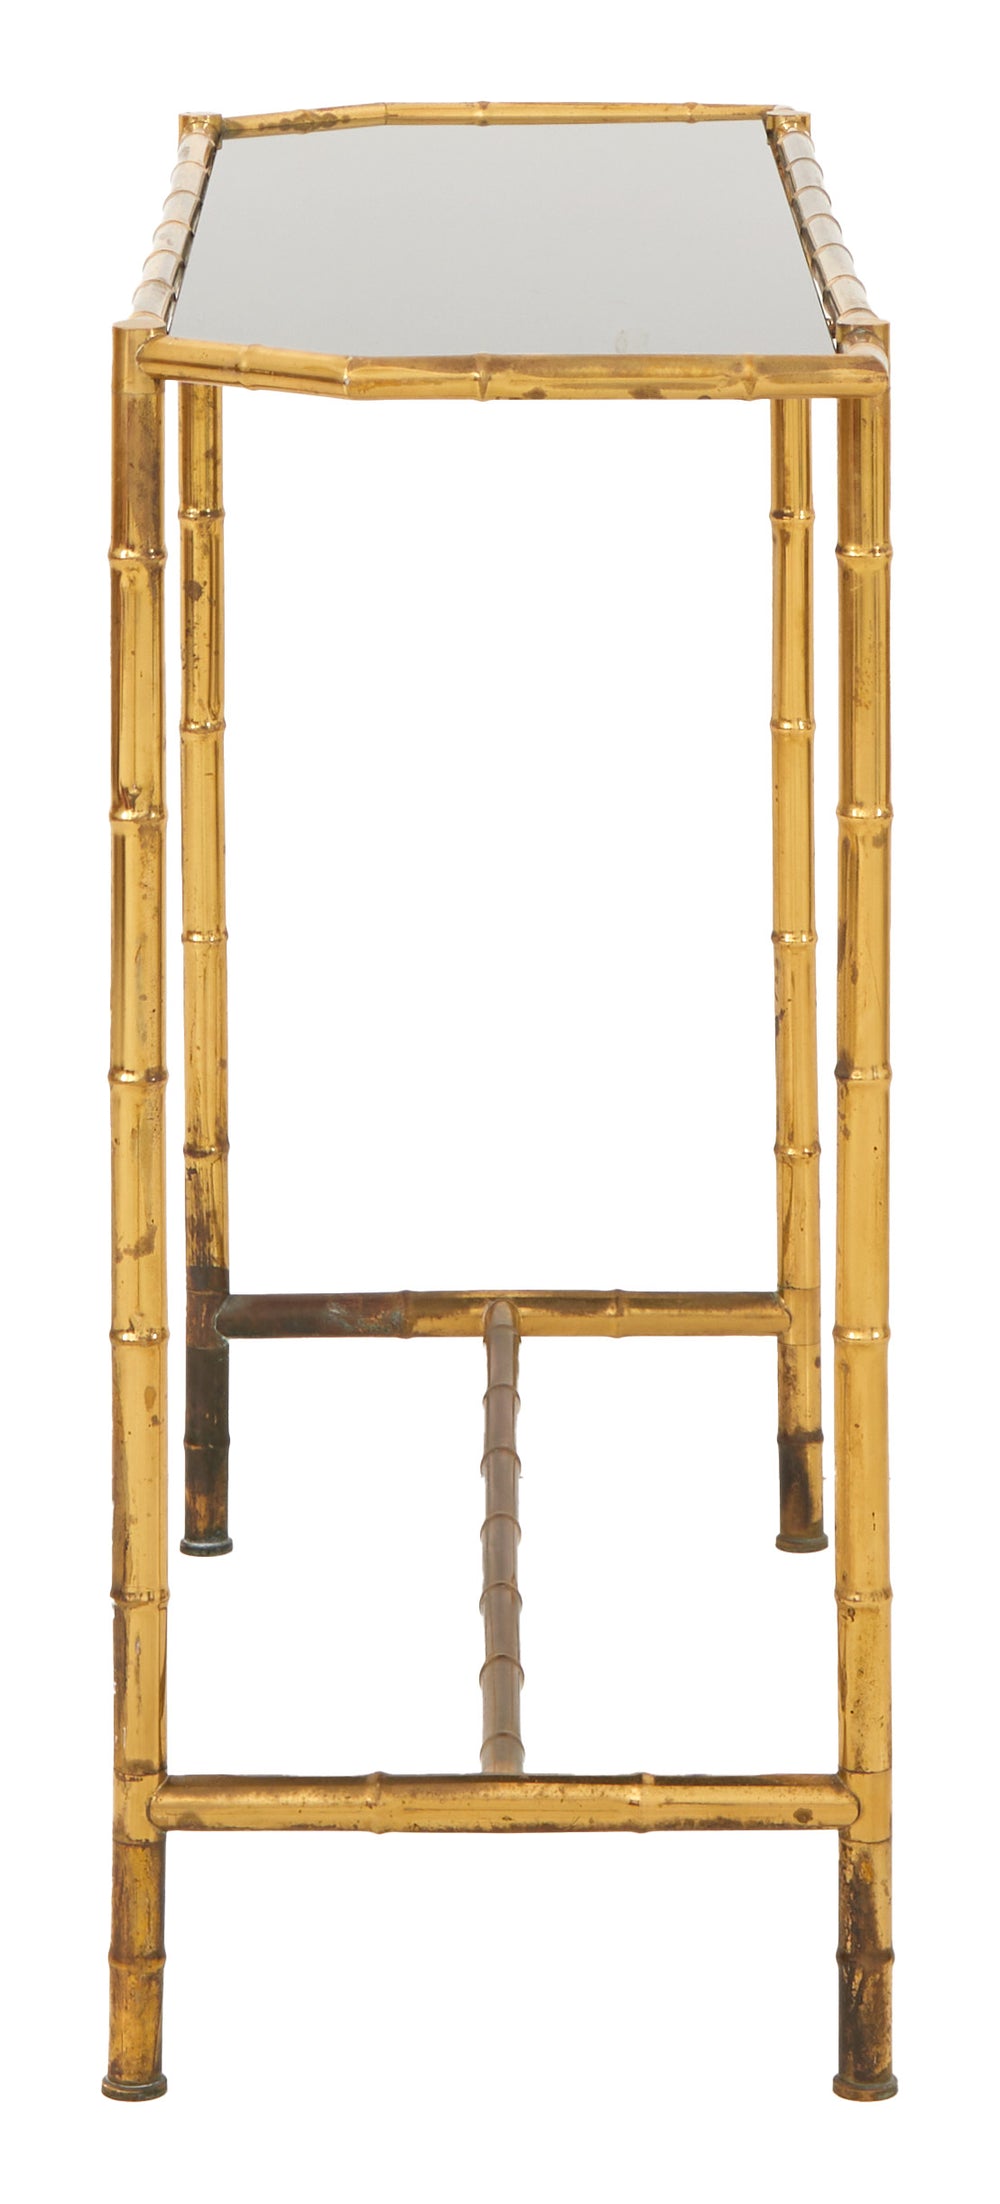 Vintage Brass Faux Bamboo Console Table